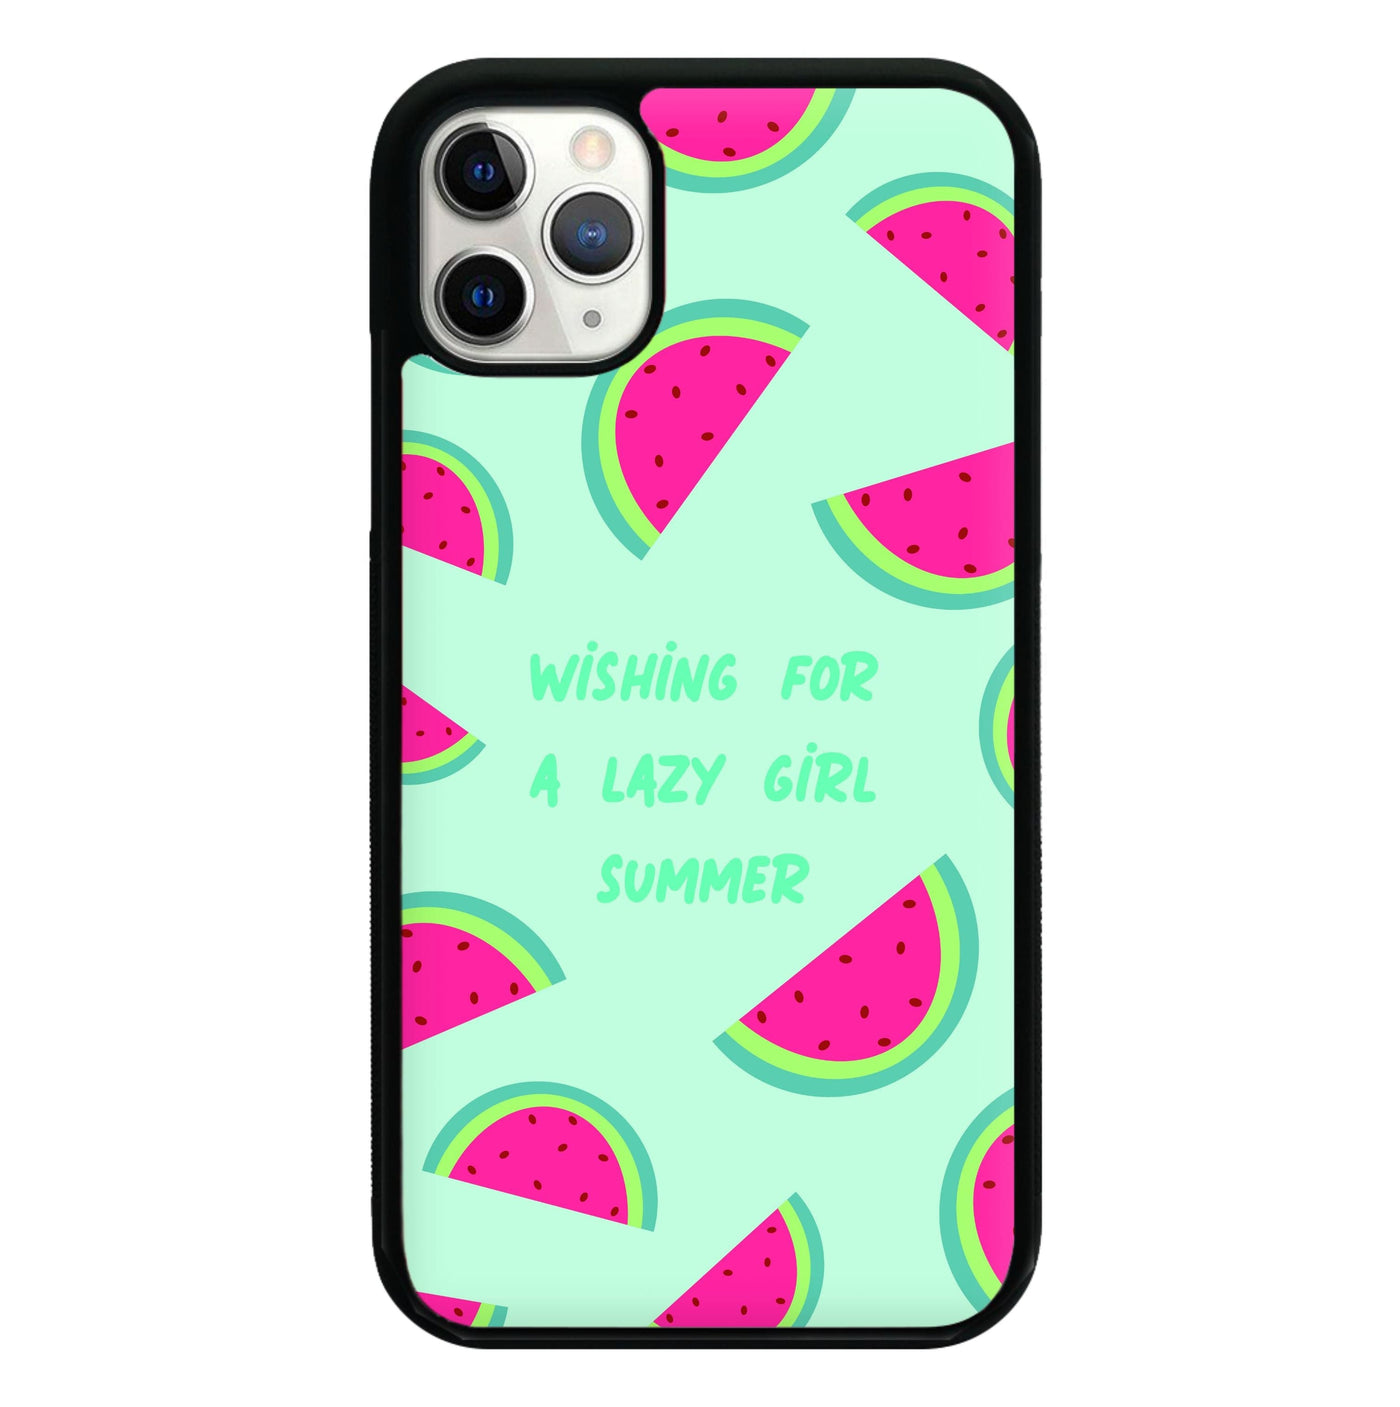 Wishing For A Lazy Girl Summer - Summer Phone Case